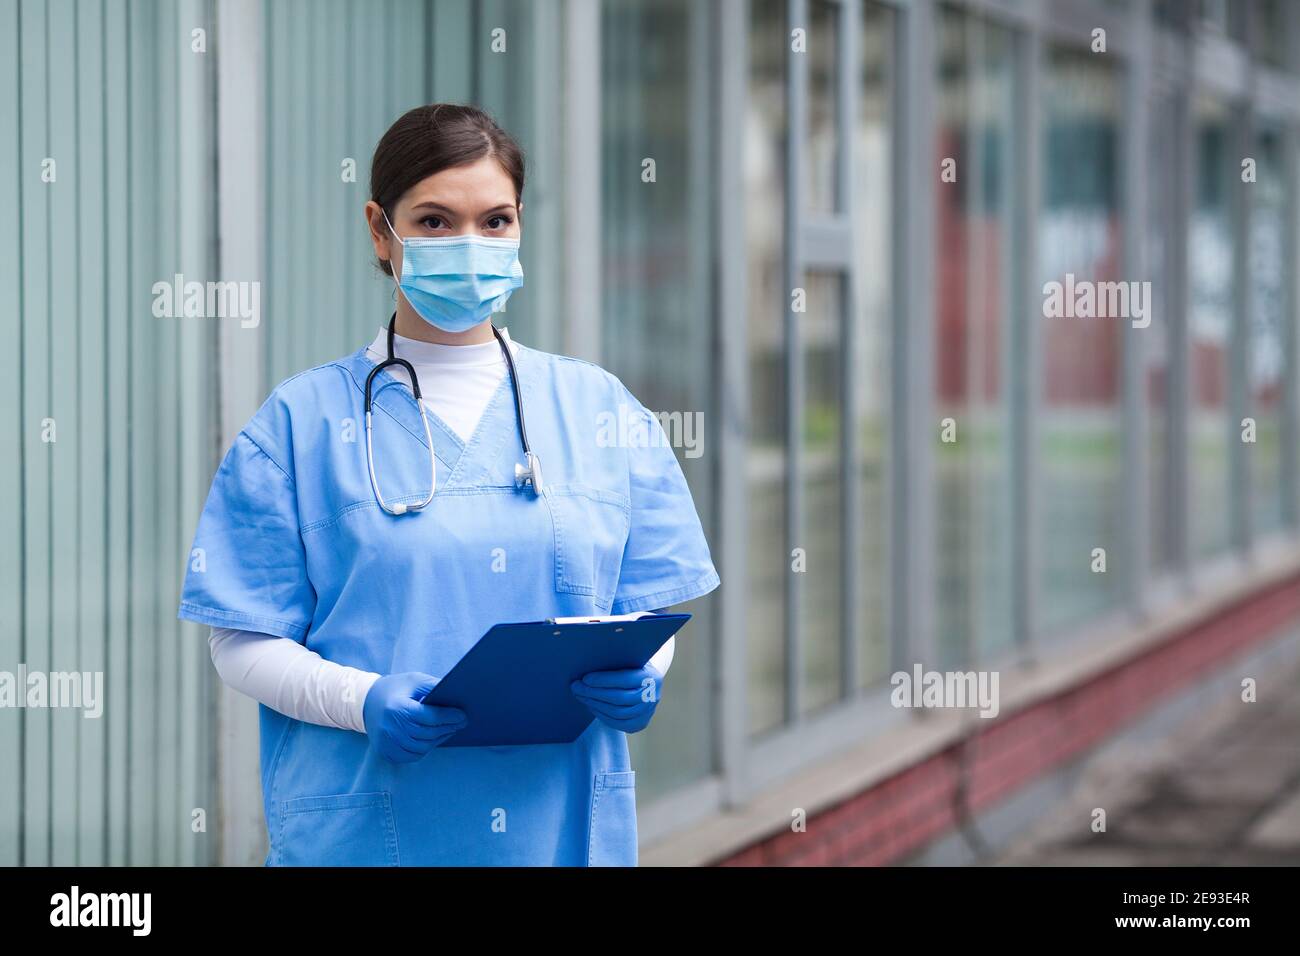 Portrait of tired exhausted female caucasian NHS key doctor in front of clinic or hospital,Coronavirus patient triage for COVID-19 virus disease,globa Stock Photo